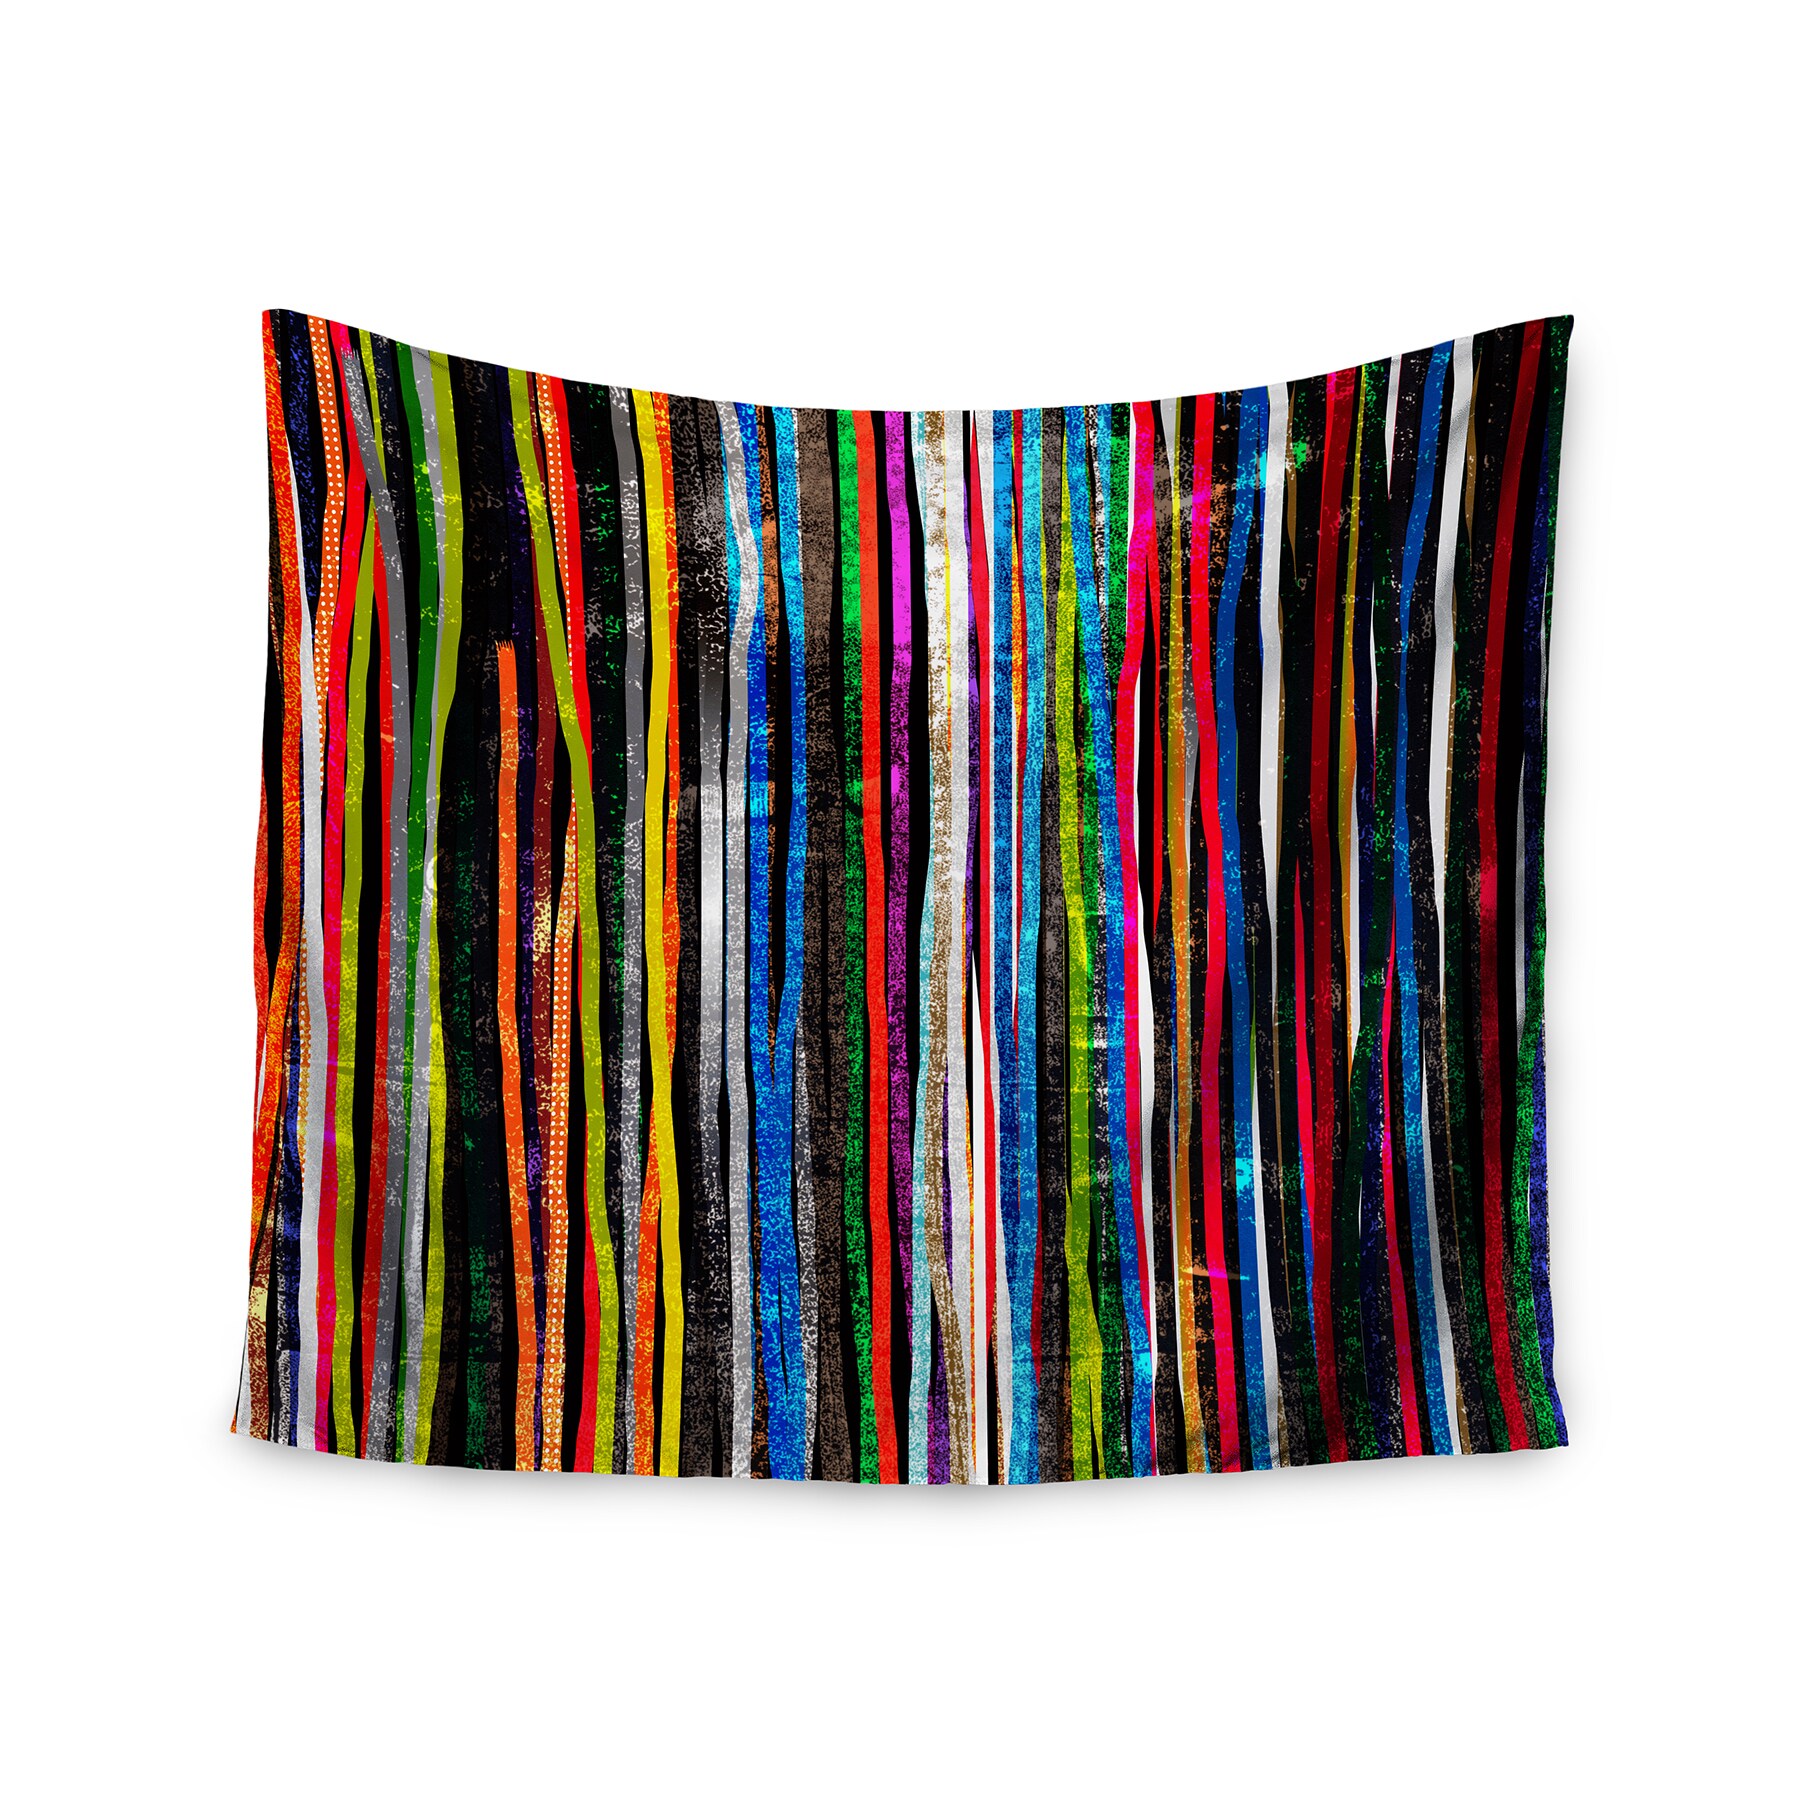 KESS InHouse Frederic Levy-Hadida Antilops Pattern Multicolor Chevron Wall Tapestry 68 x 80